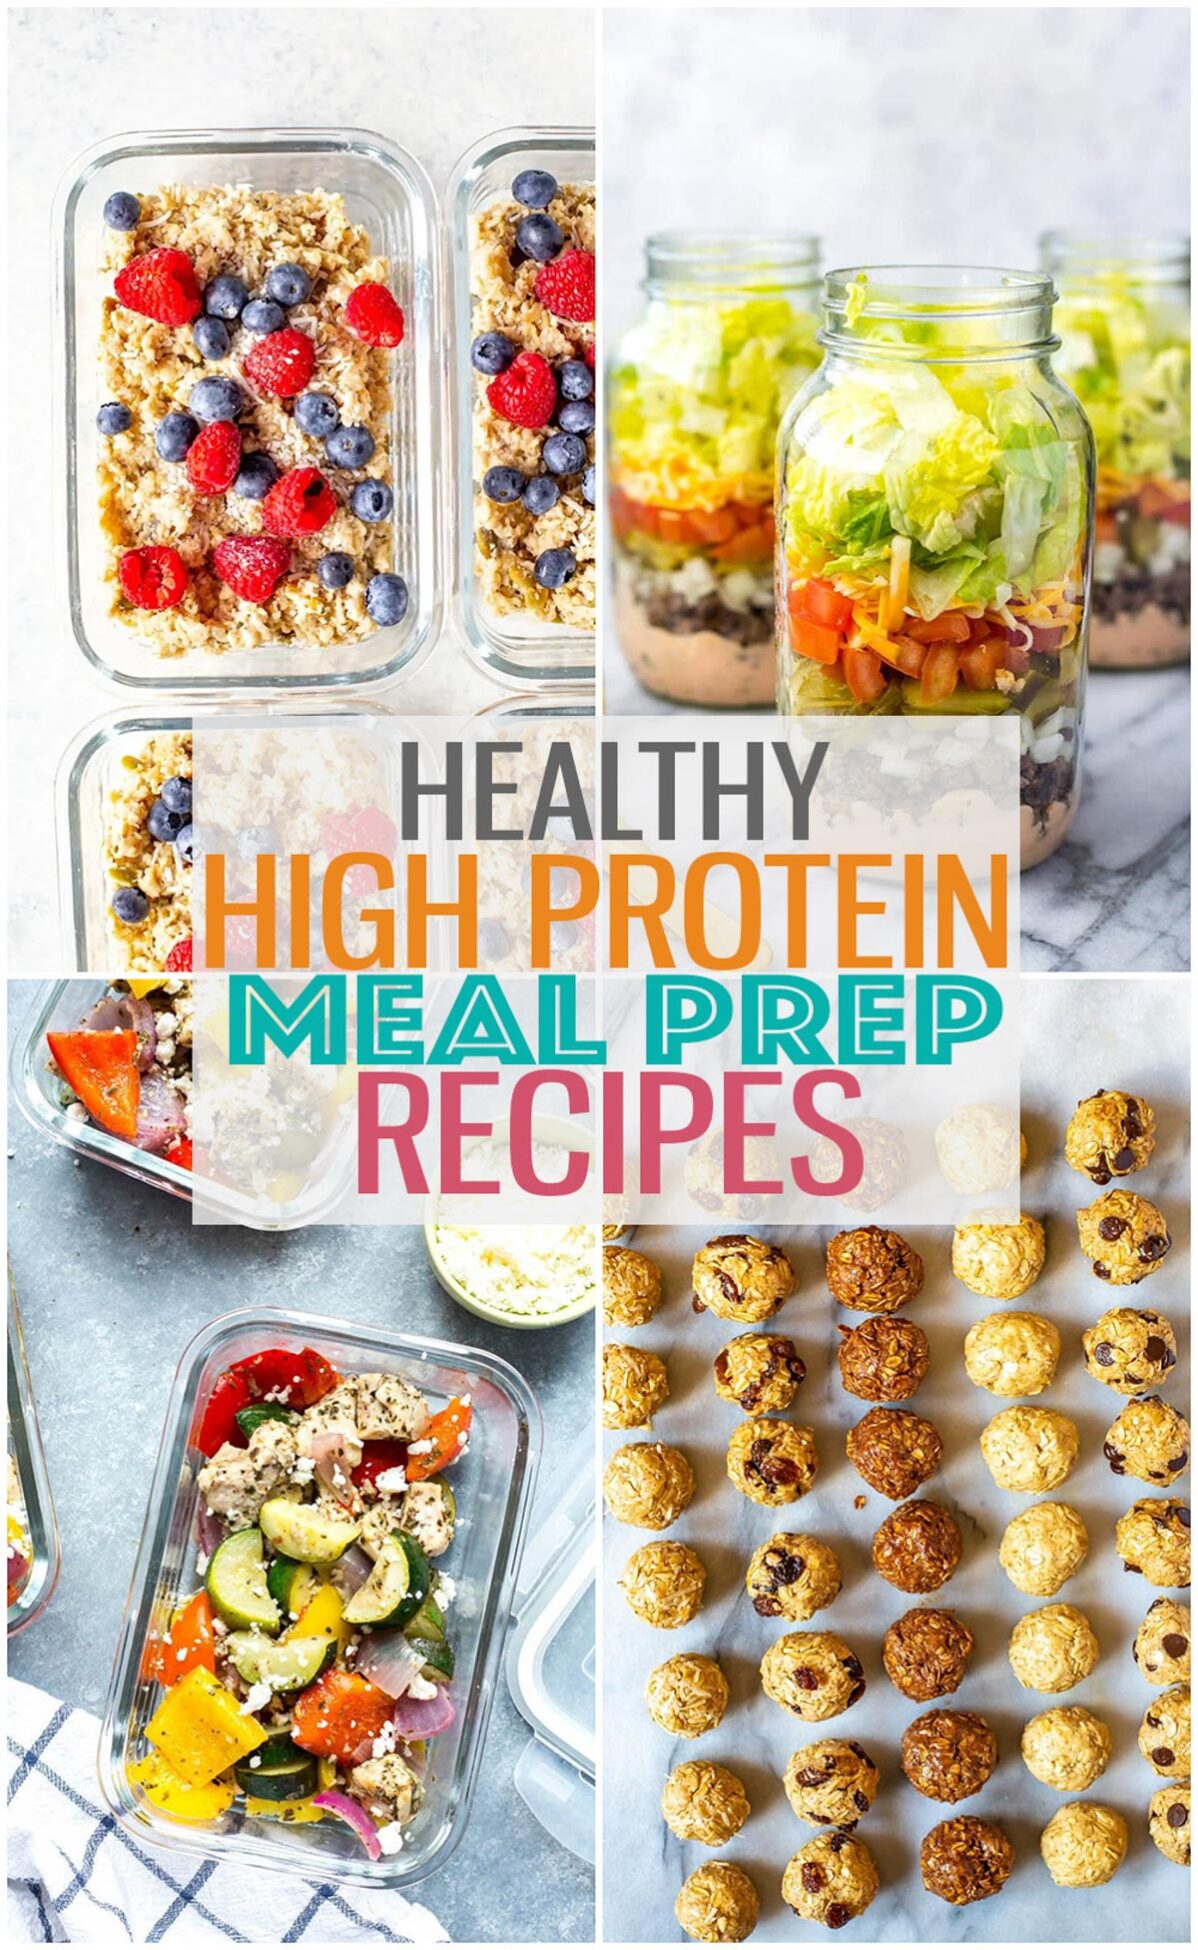 A collage of four different meal prep recipes with the text "Healthy High Protein Meal Prep Recipes" layered over top.